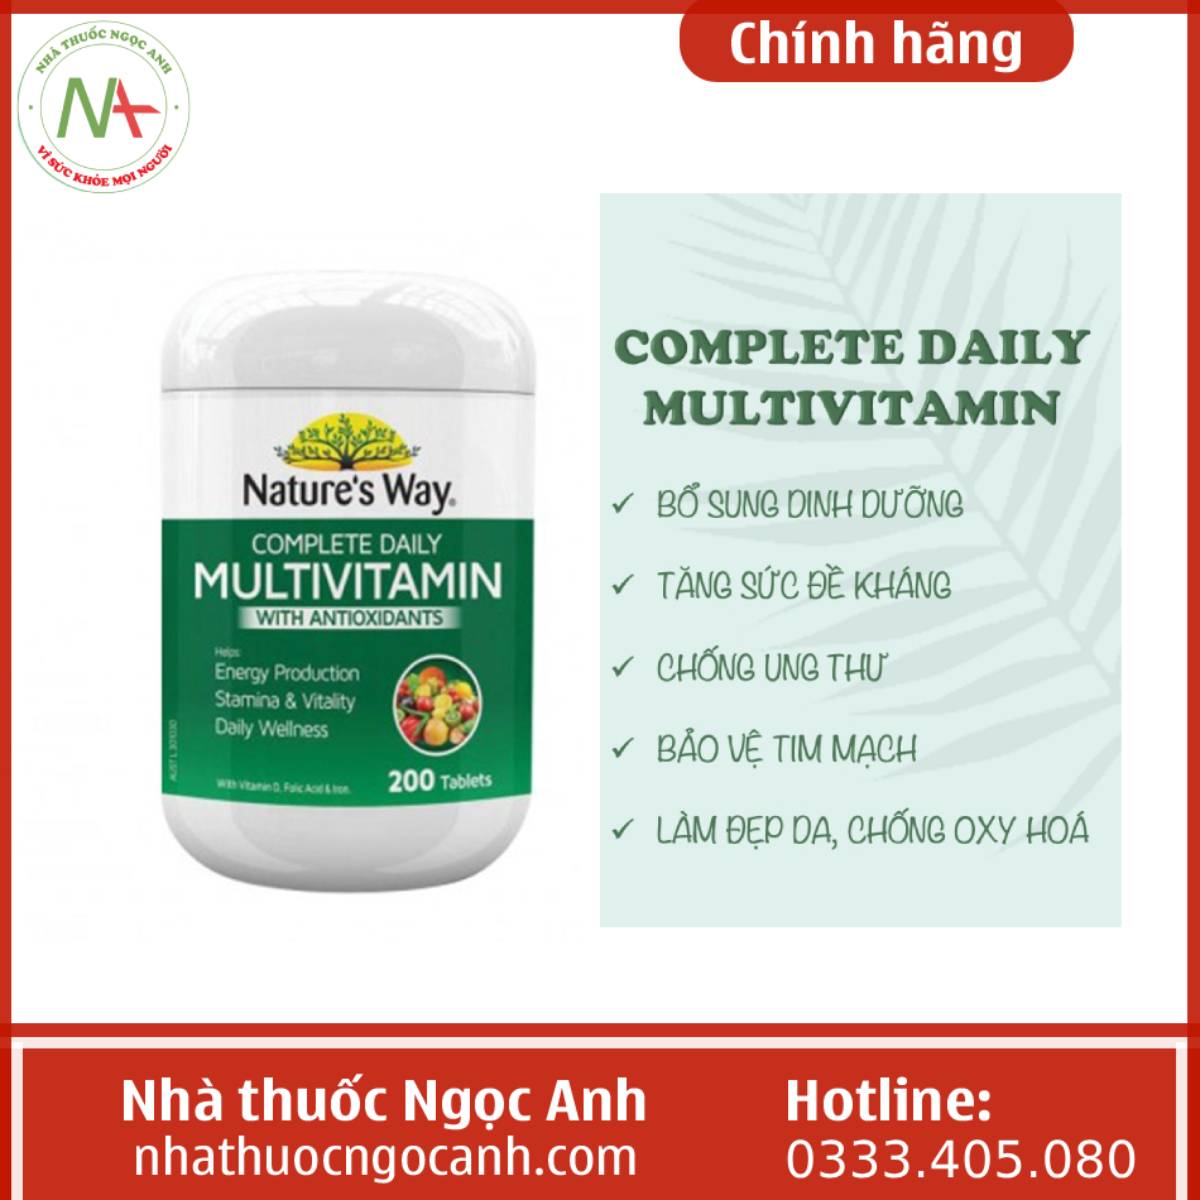 Nature’s Way Complete Daily Multivitamin with Antioxidants bổ sung các loại vitamin cho cơ thể